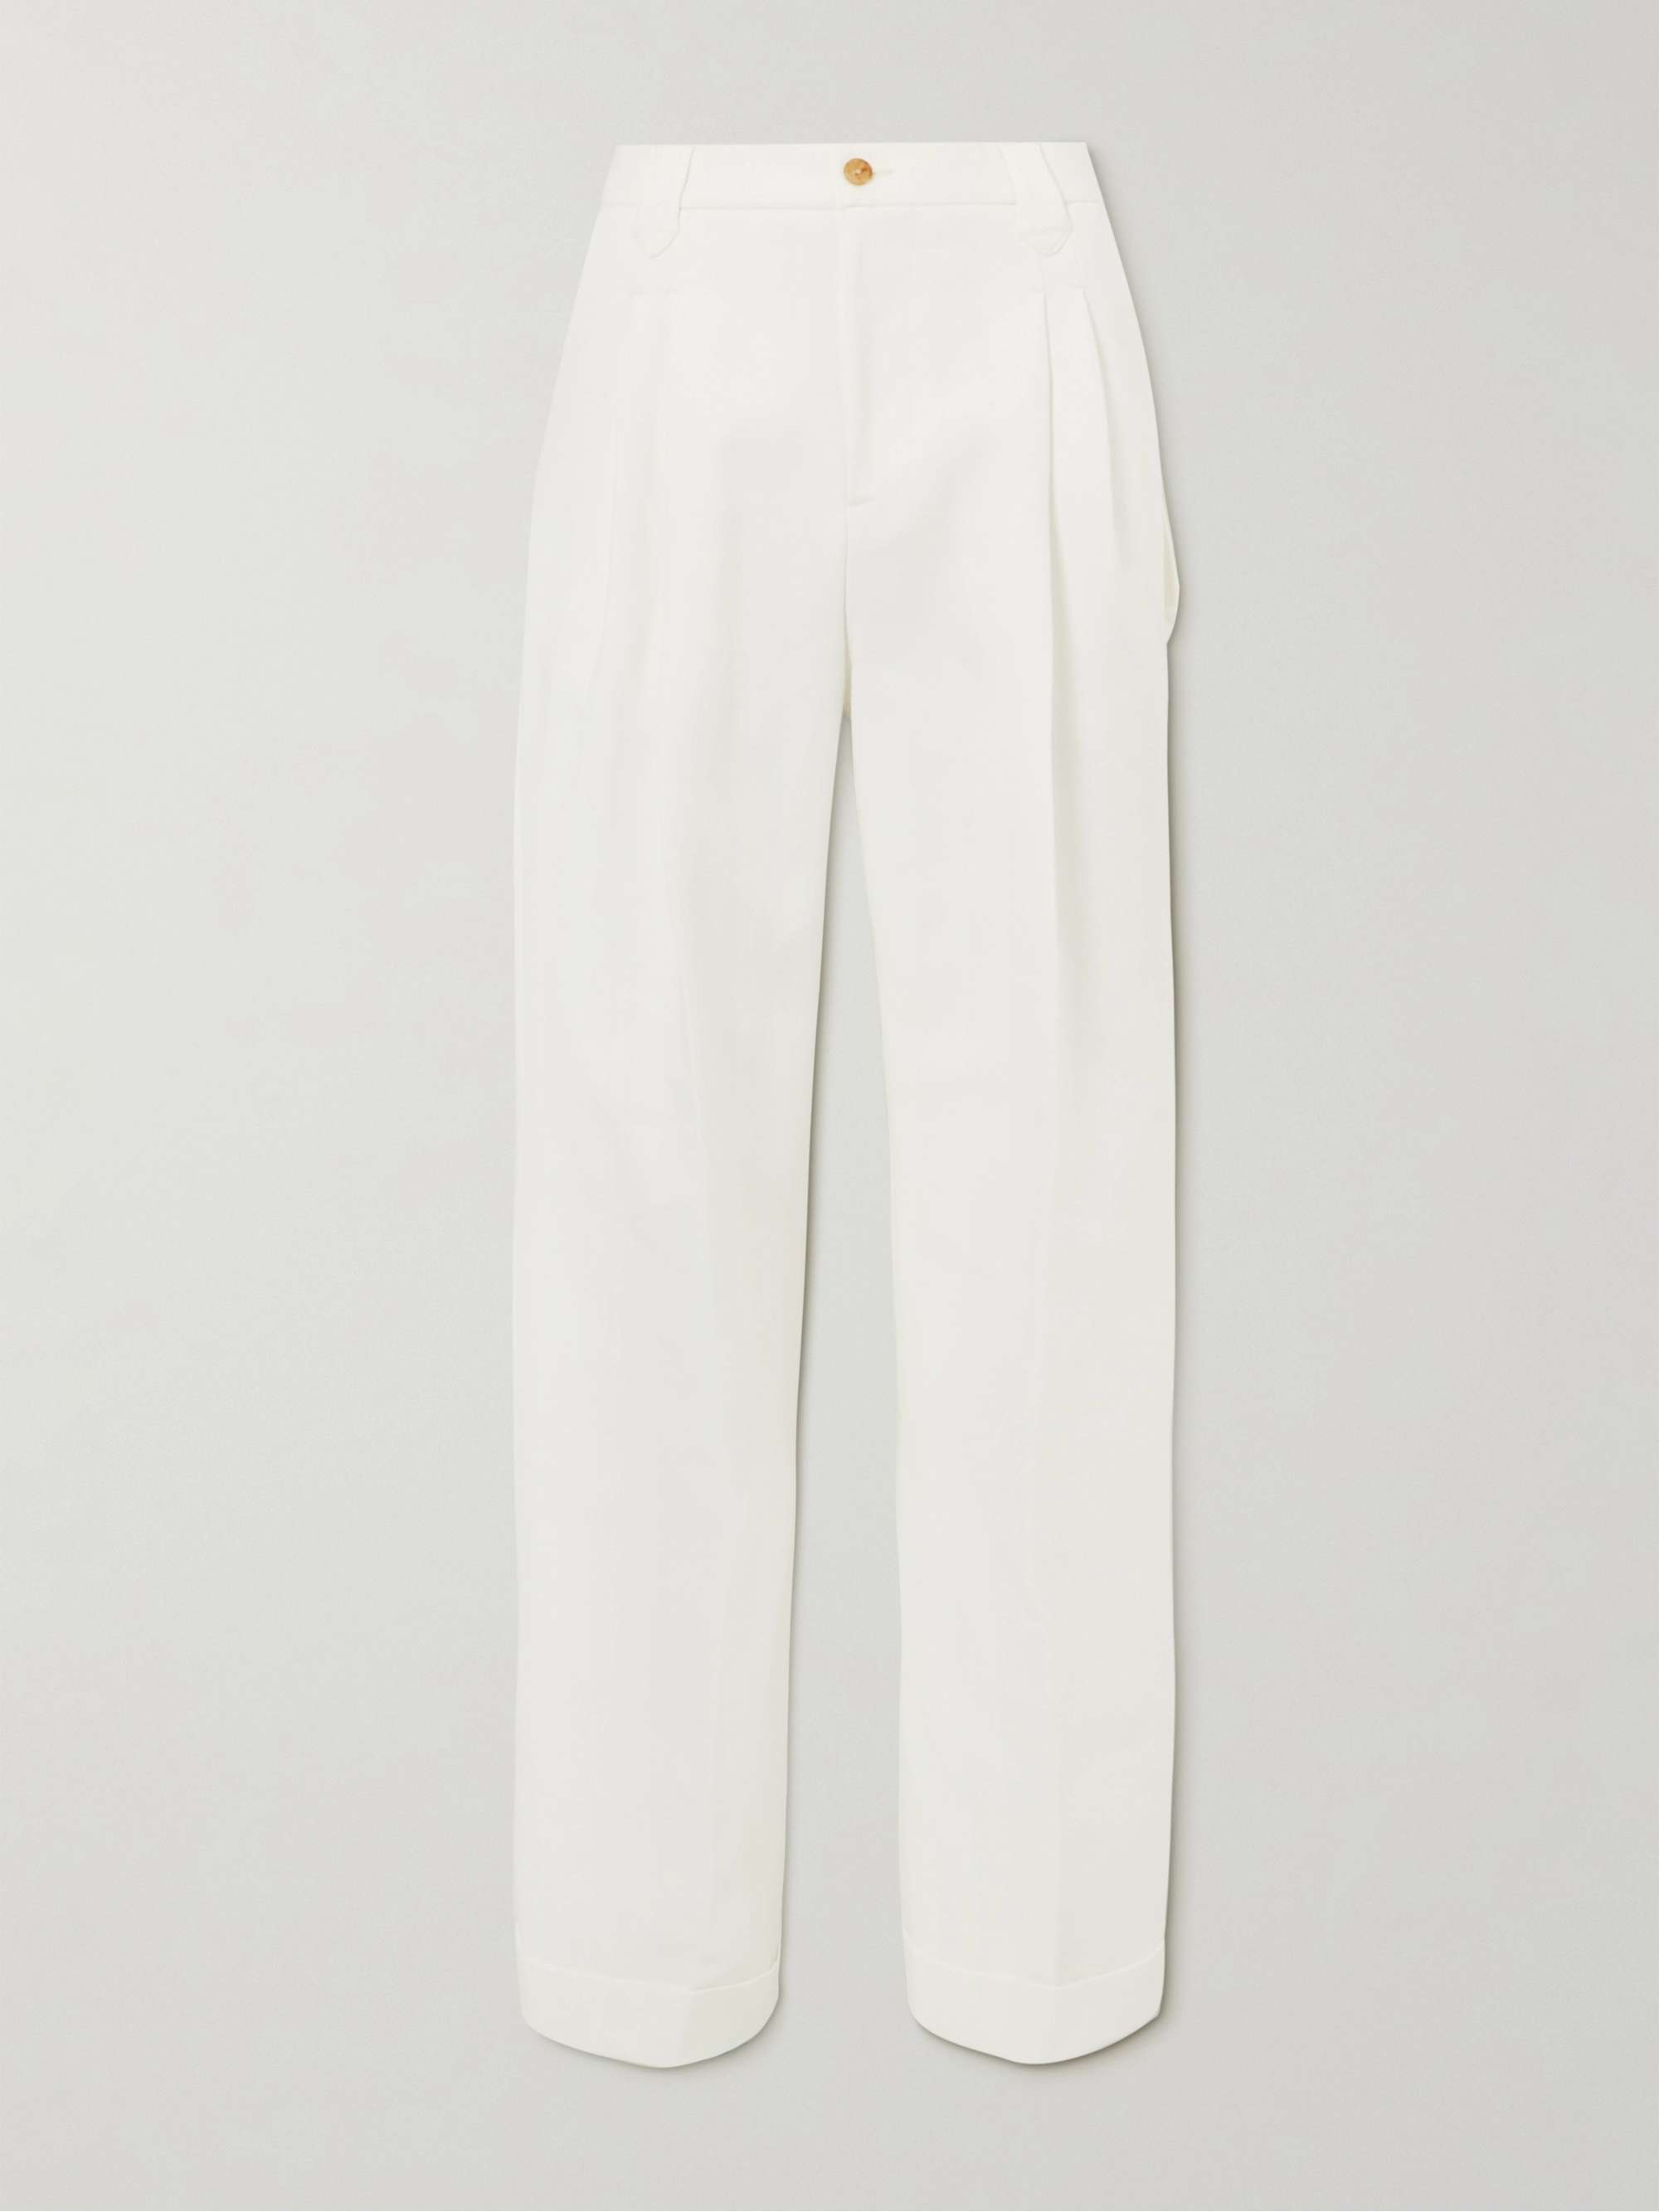 UMIT BENAN B+ + Jacques Marie Mage Wide-Leg Pleated Cotton and Linen ...